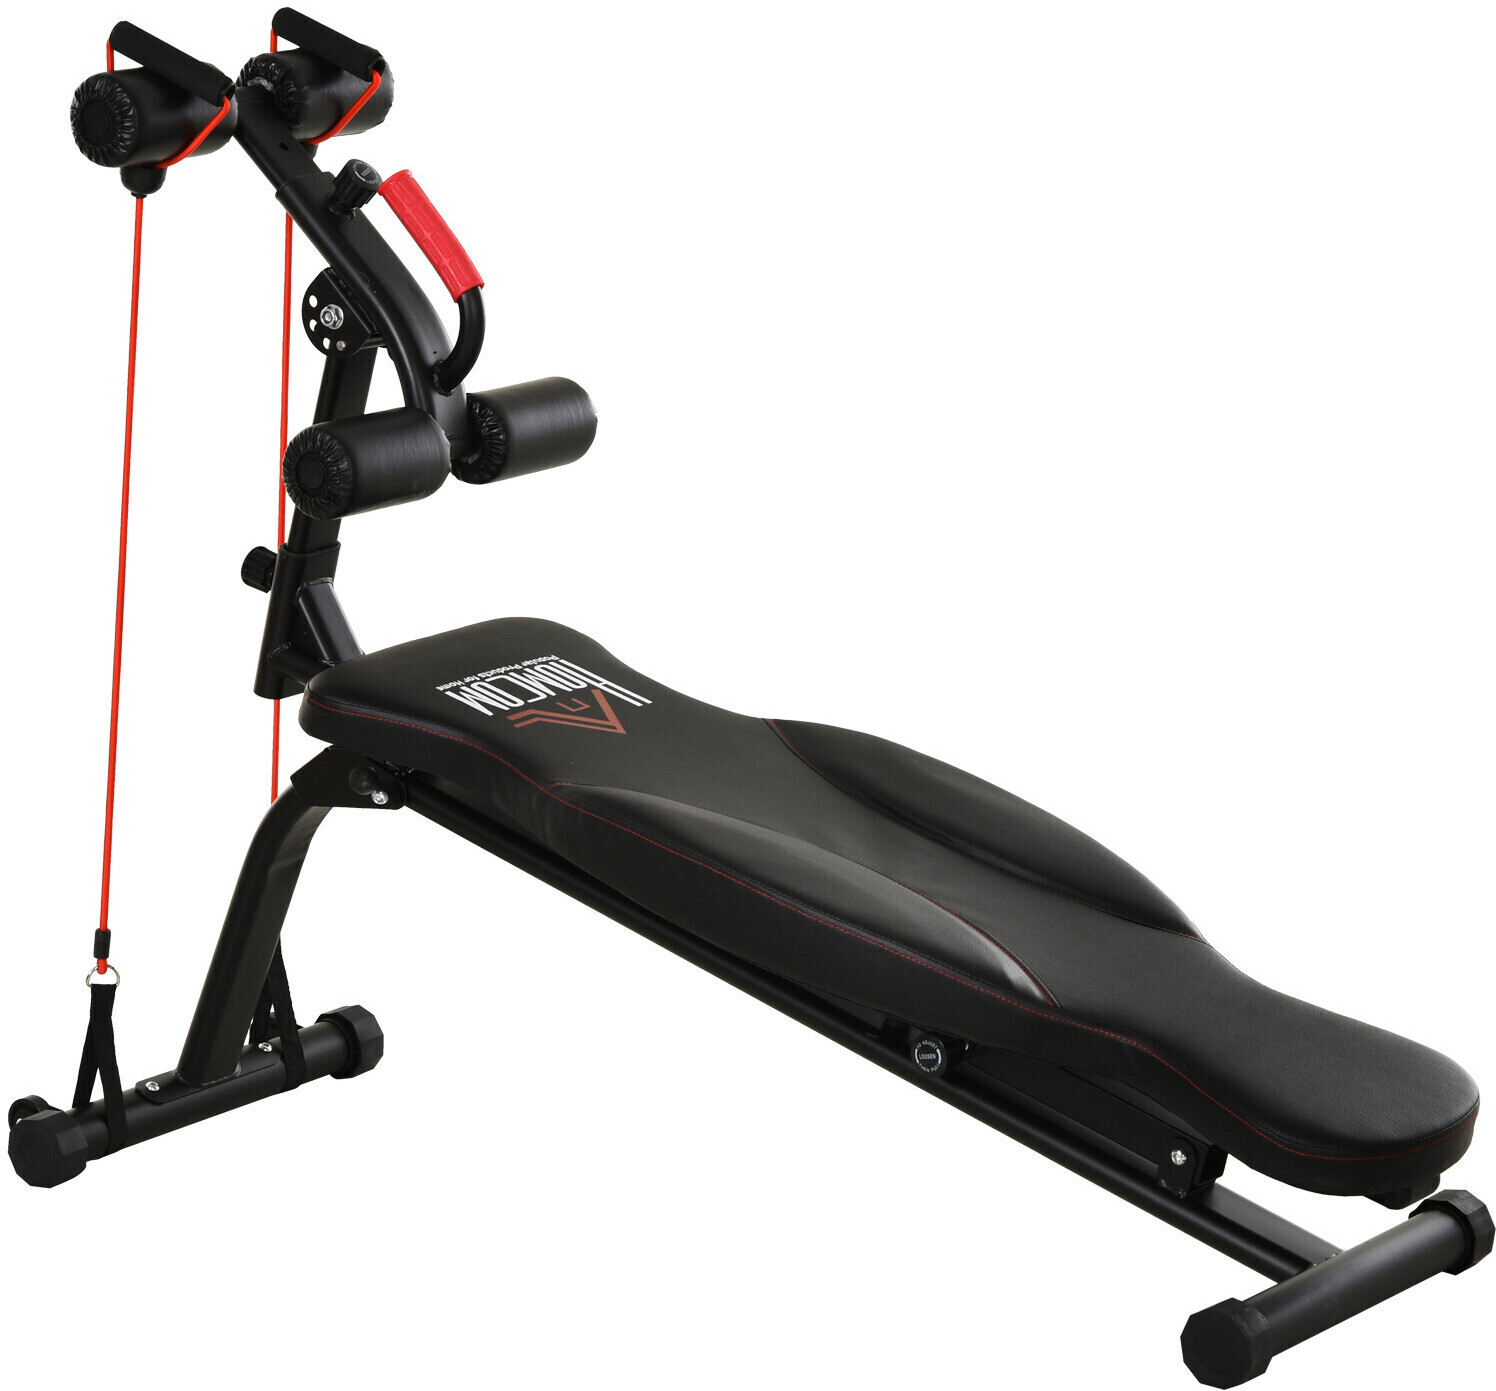 Banc de musculation inclinable - Bench